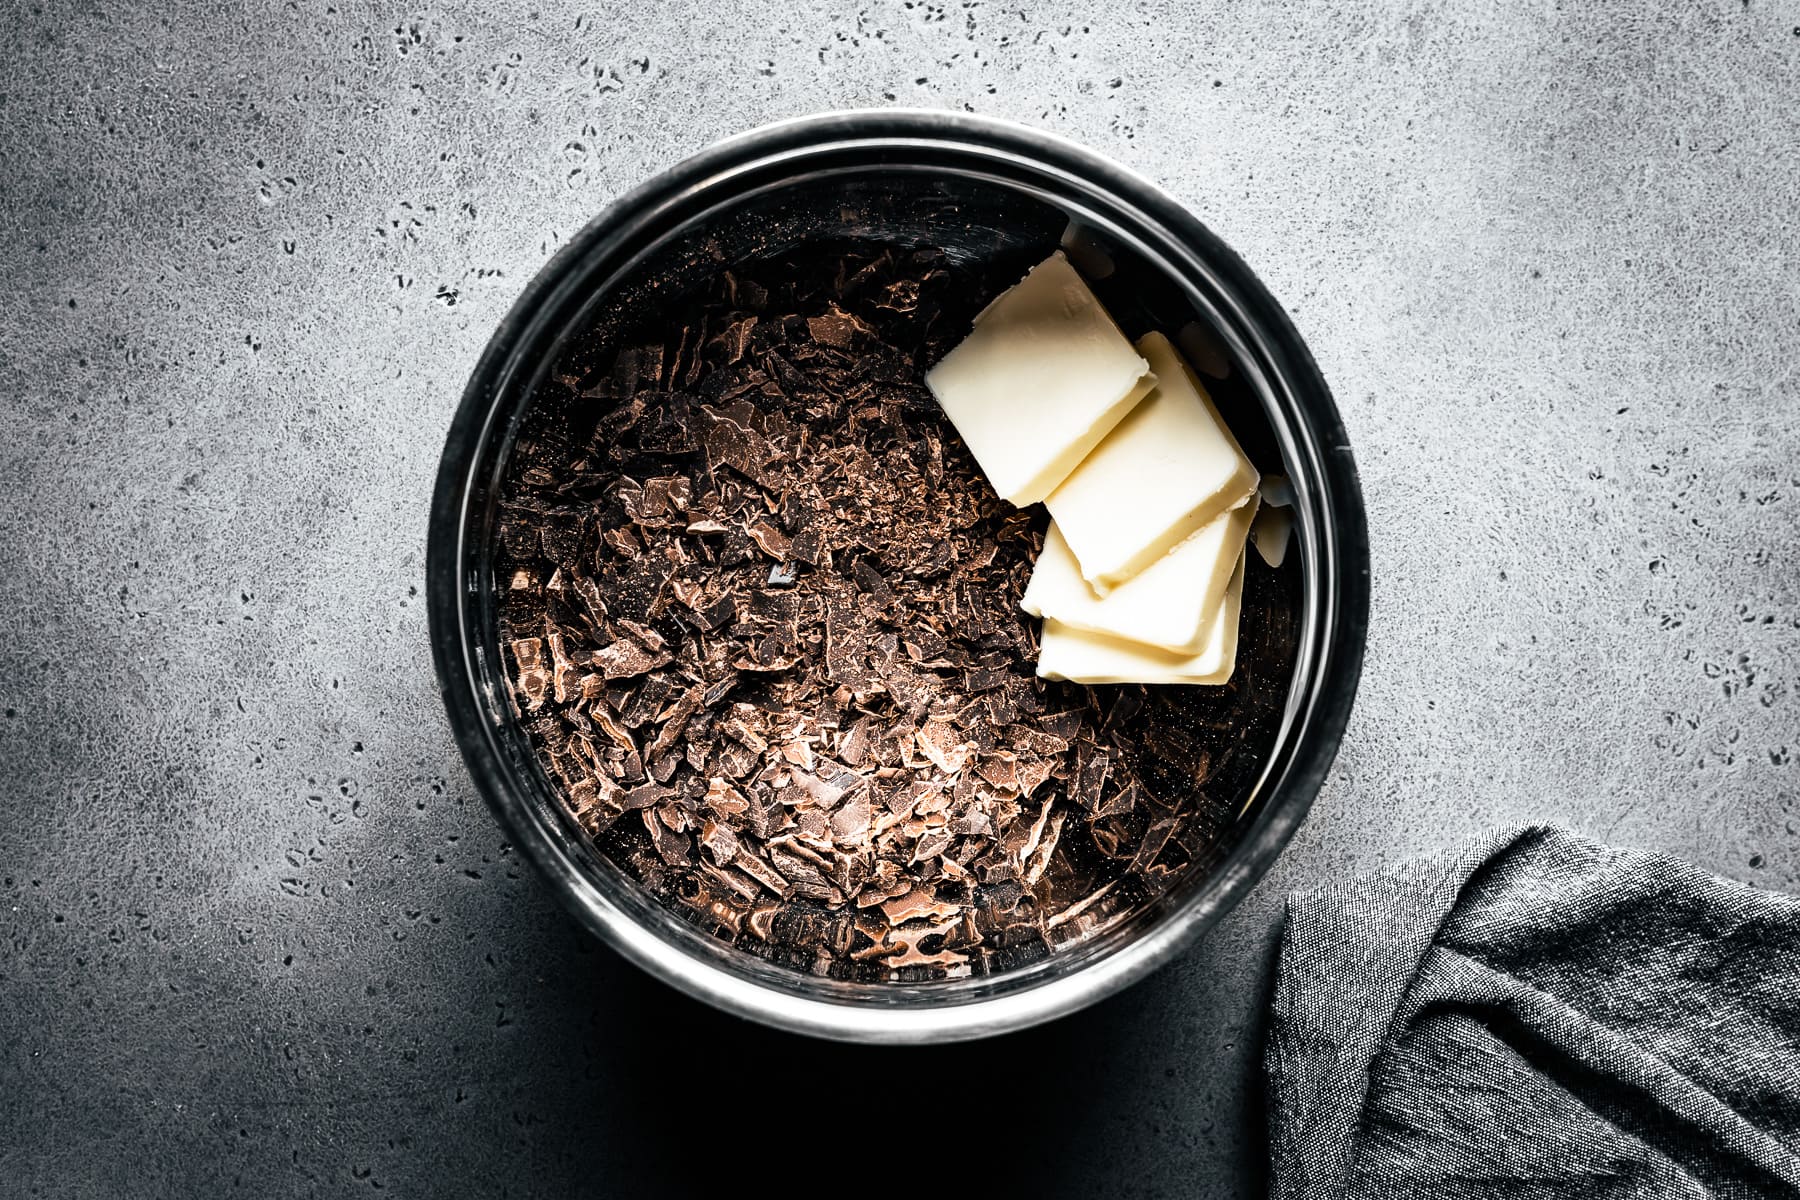 A process photo showing a metal bowl with finely chopped chocolate and pats of butter inside. The bowl rests on a grey stone surface with a grey napkin nearby.